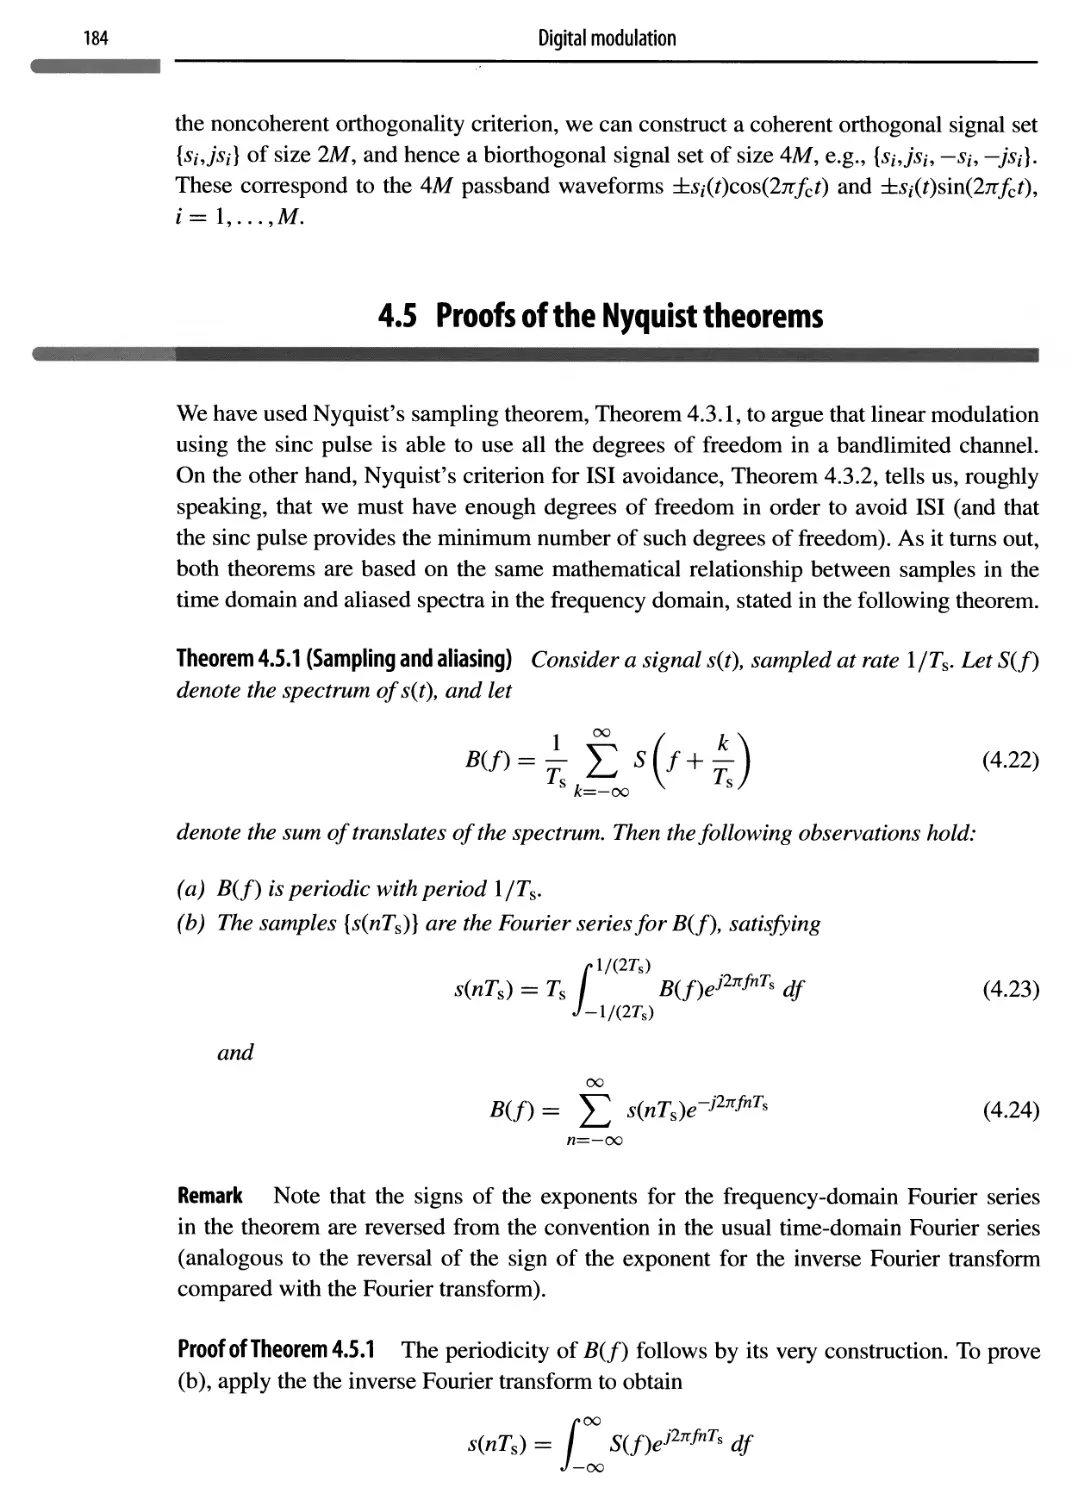 4.5 Proofs of the Nyquist theorems 184